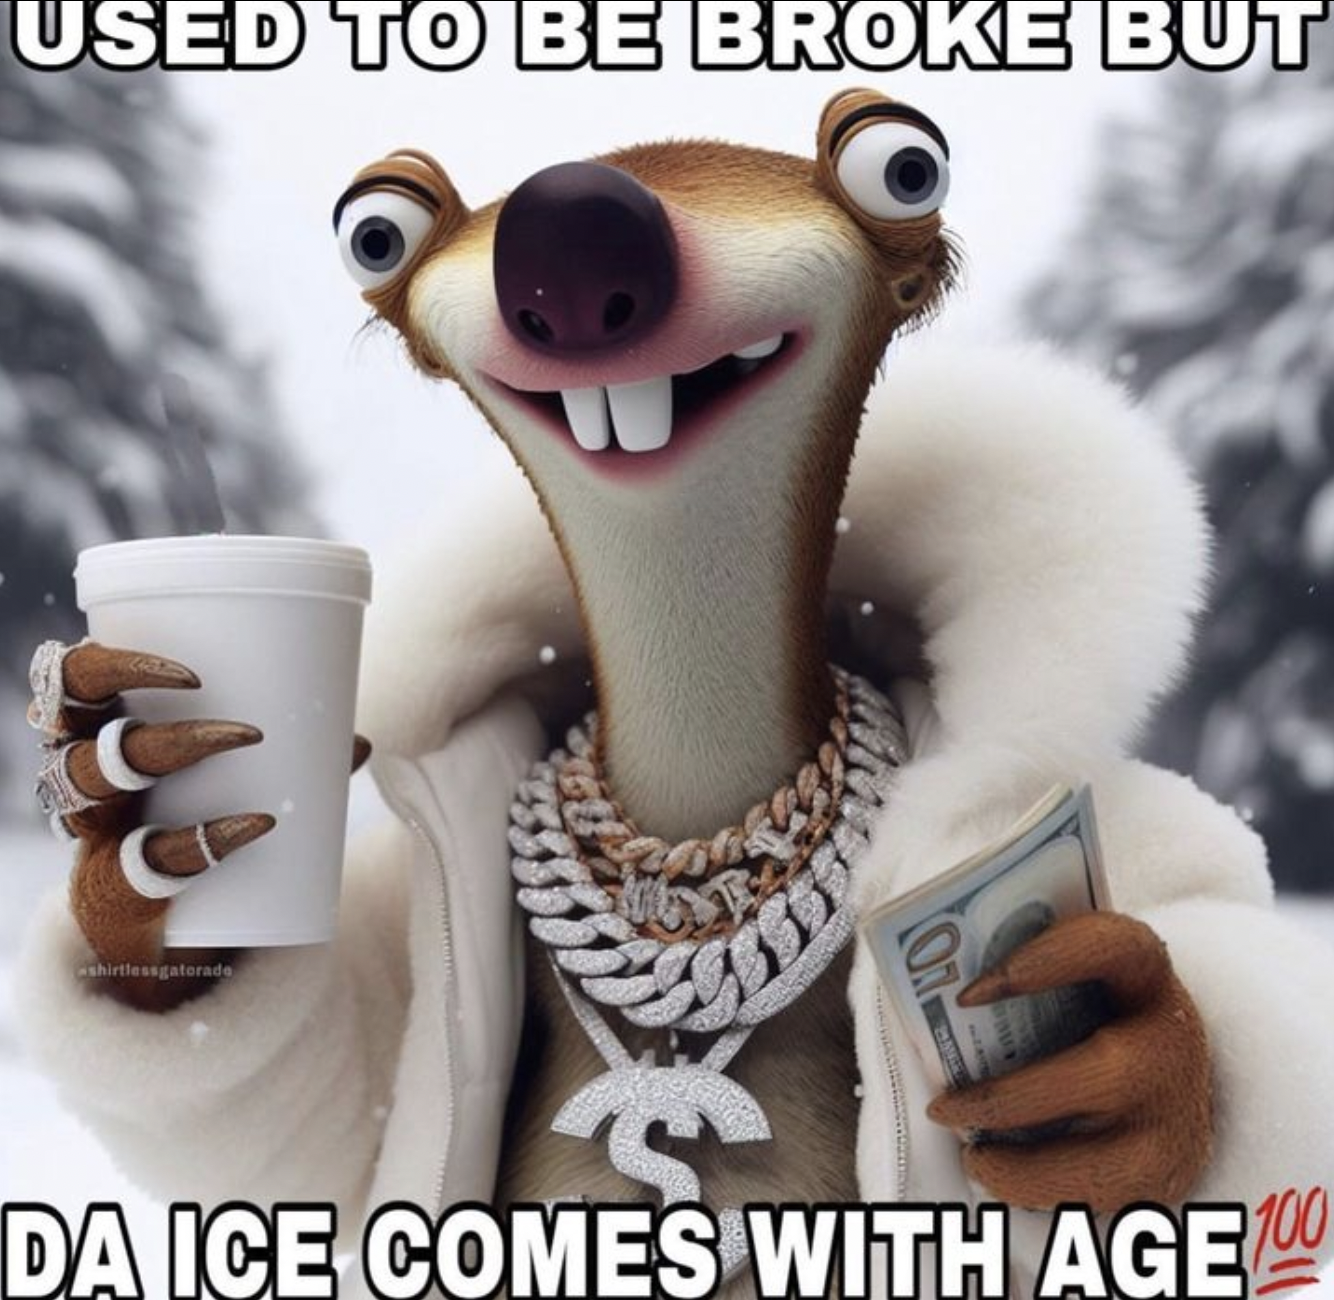 photo caption - Used To Be Broke But Da Ice Comes With Age 100